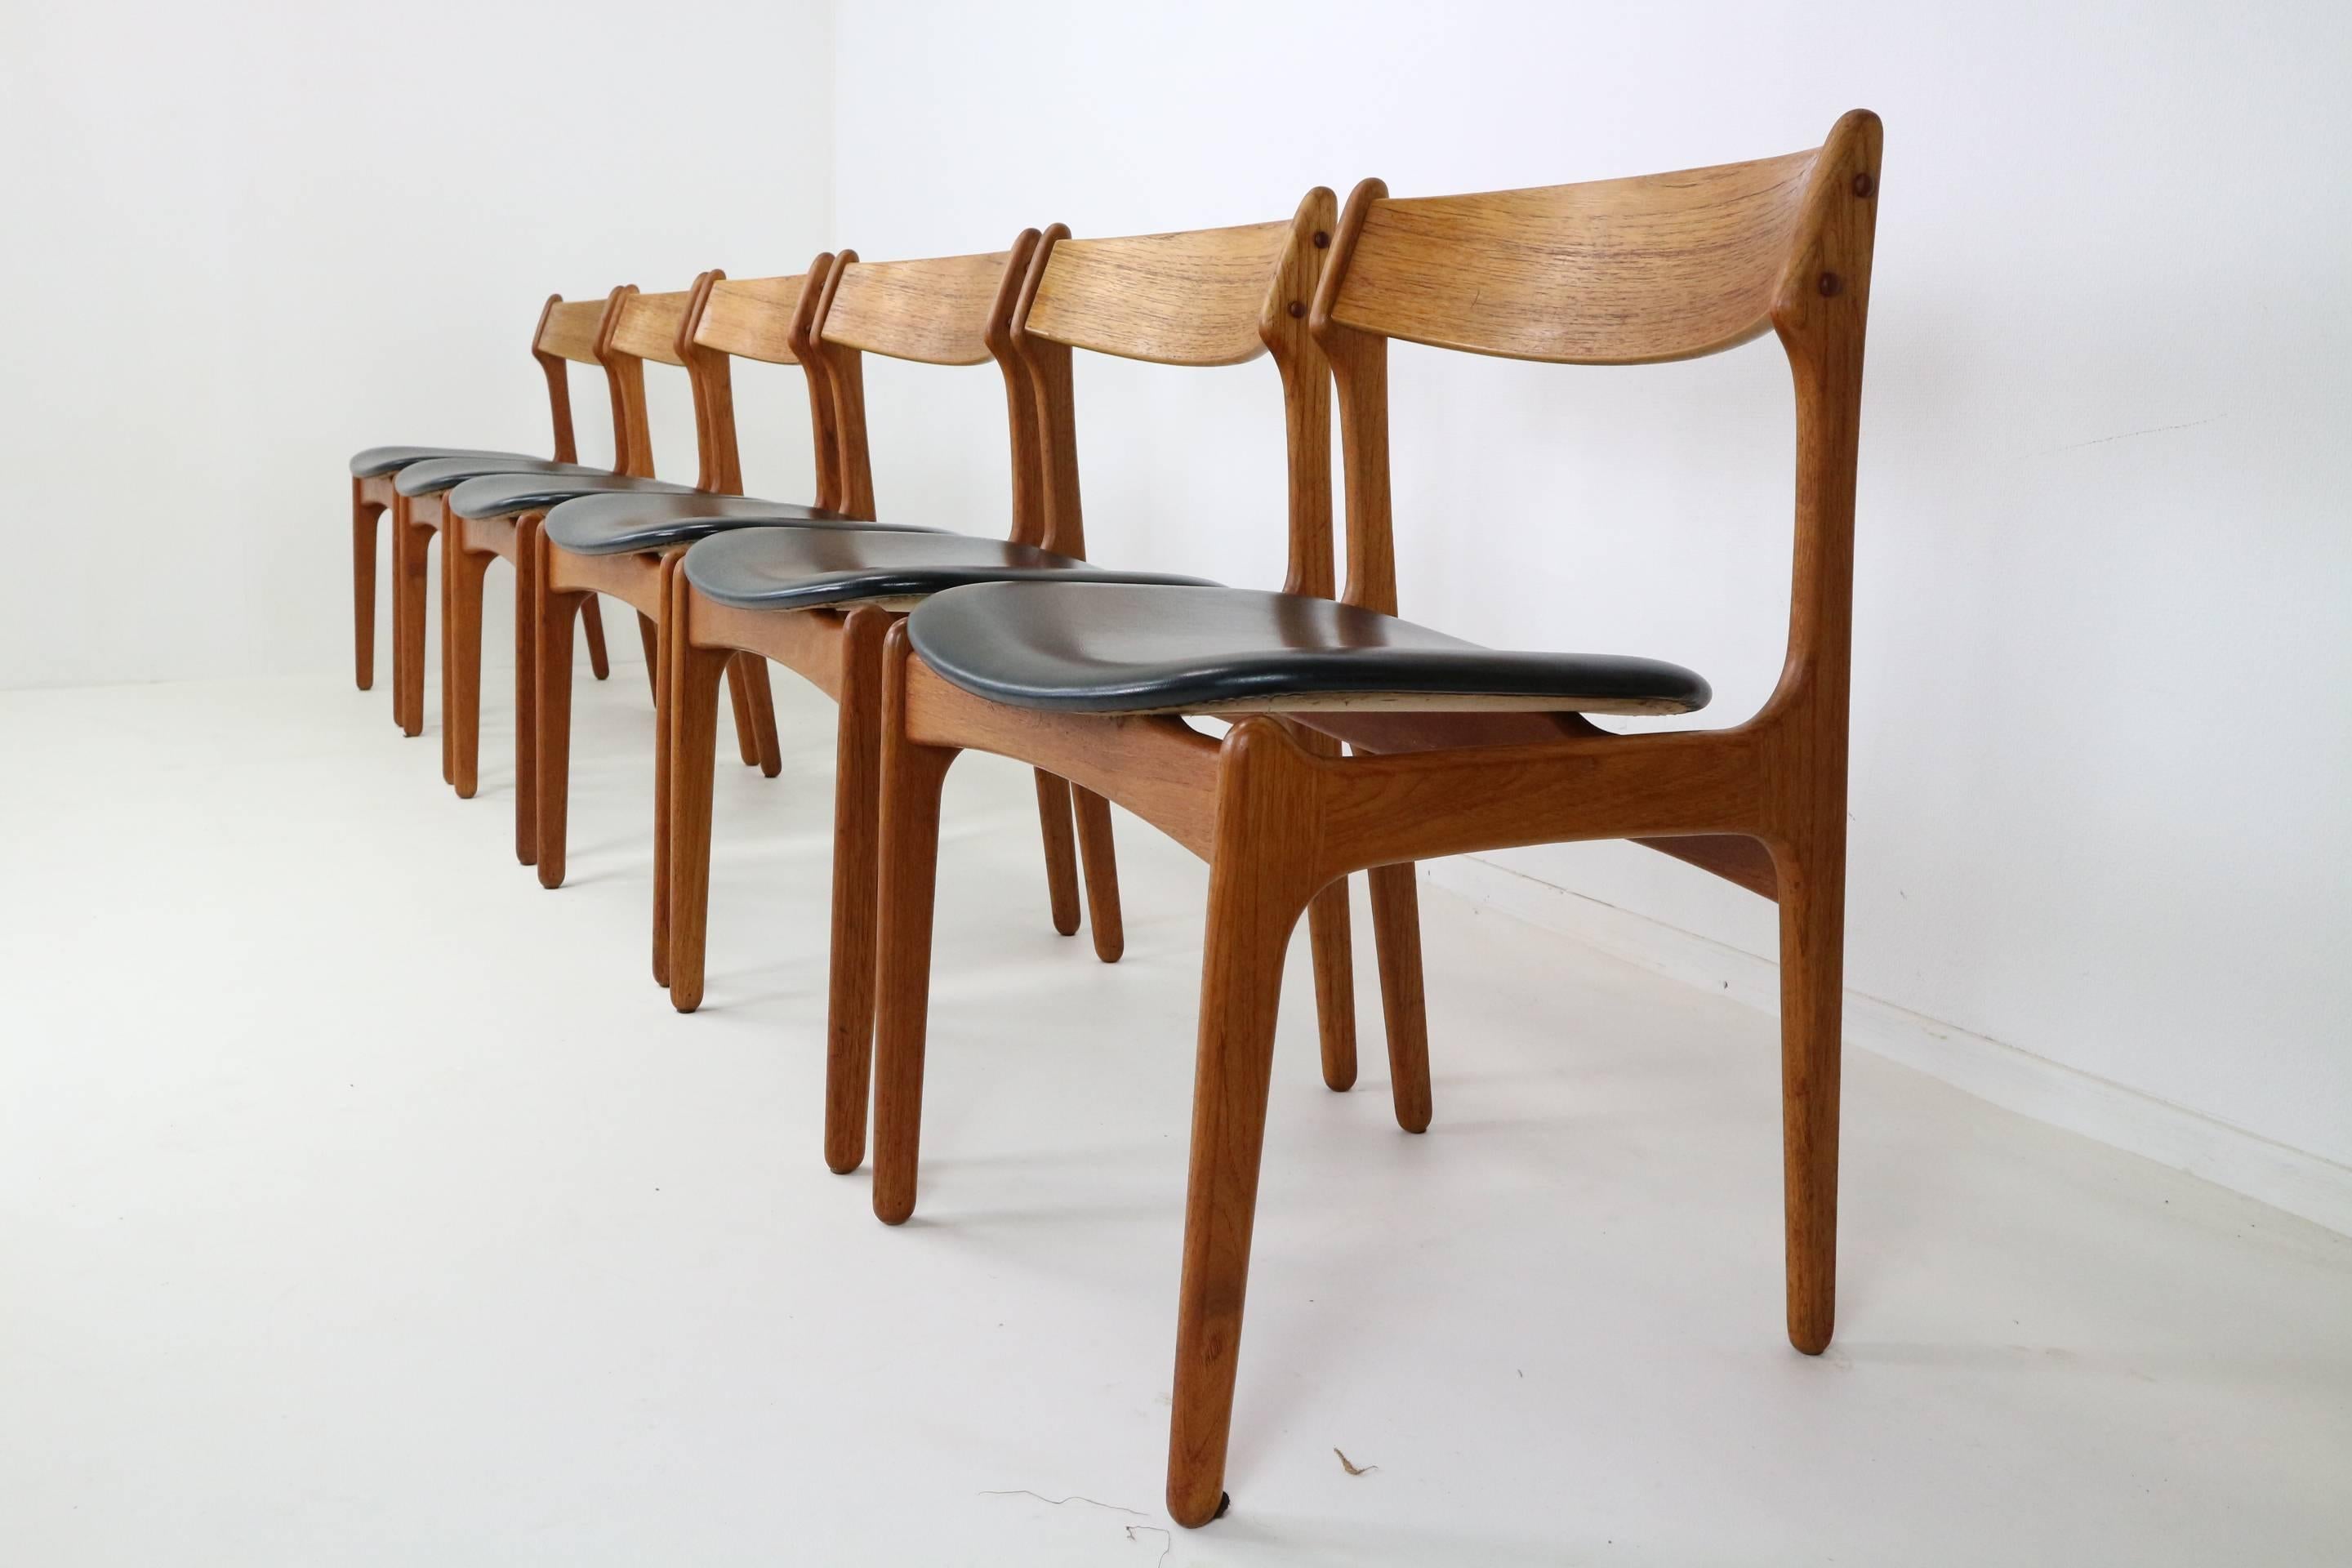 One of the most popular chairs due to its extreme comfort thanks to excellent design. A wonderful set of Erik Buch Danish Modern teak dining chairs. The particular set includes six side chairs. Designed by Erik Buch for O.D. Mobler, Denmark, the